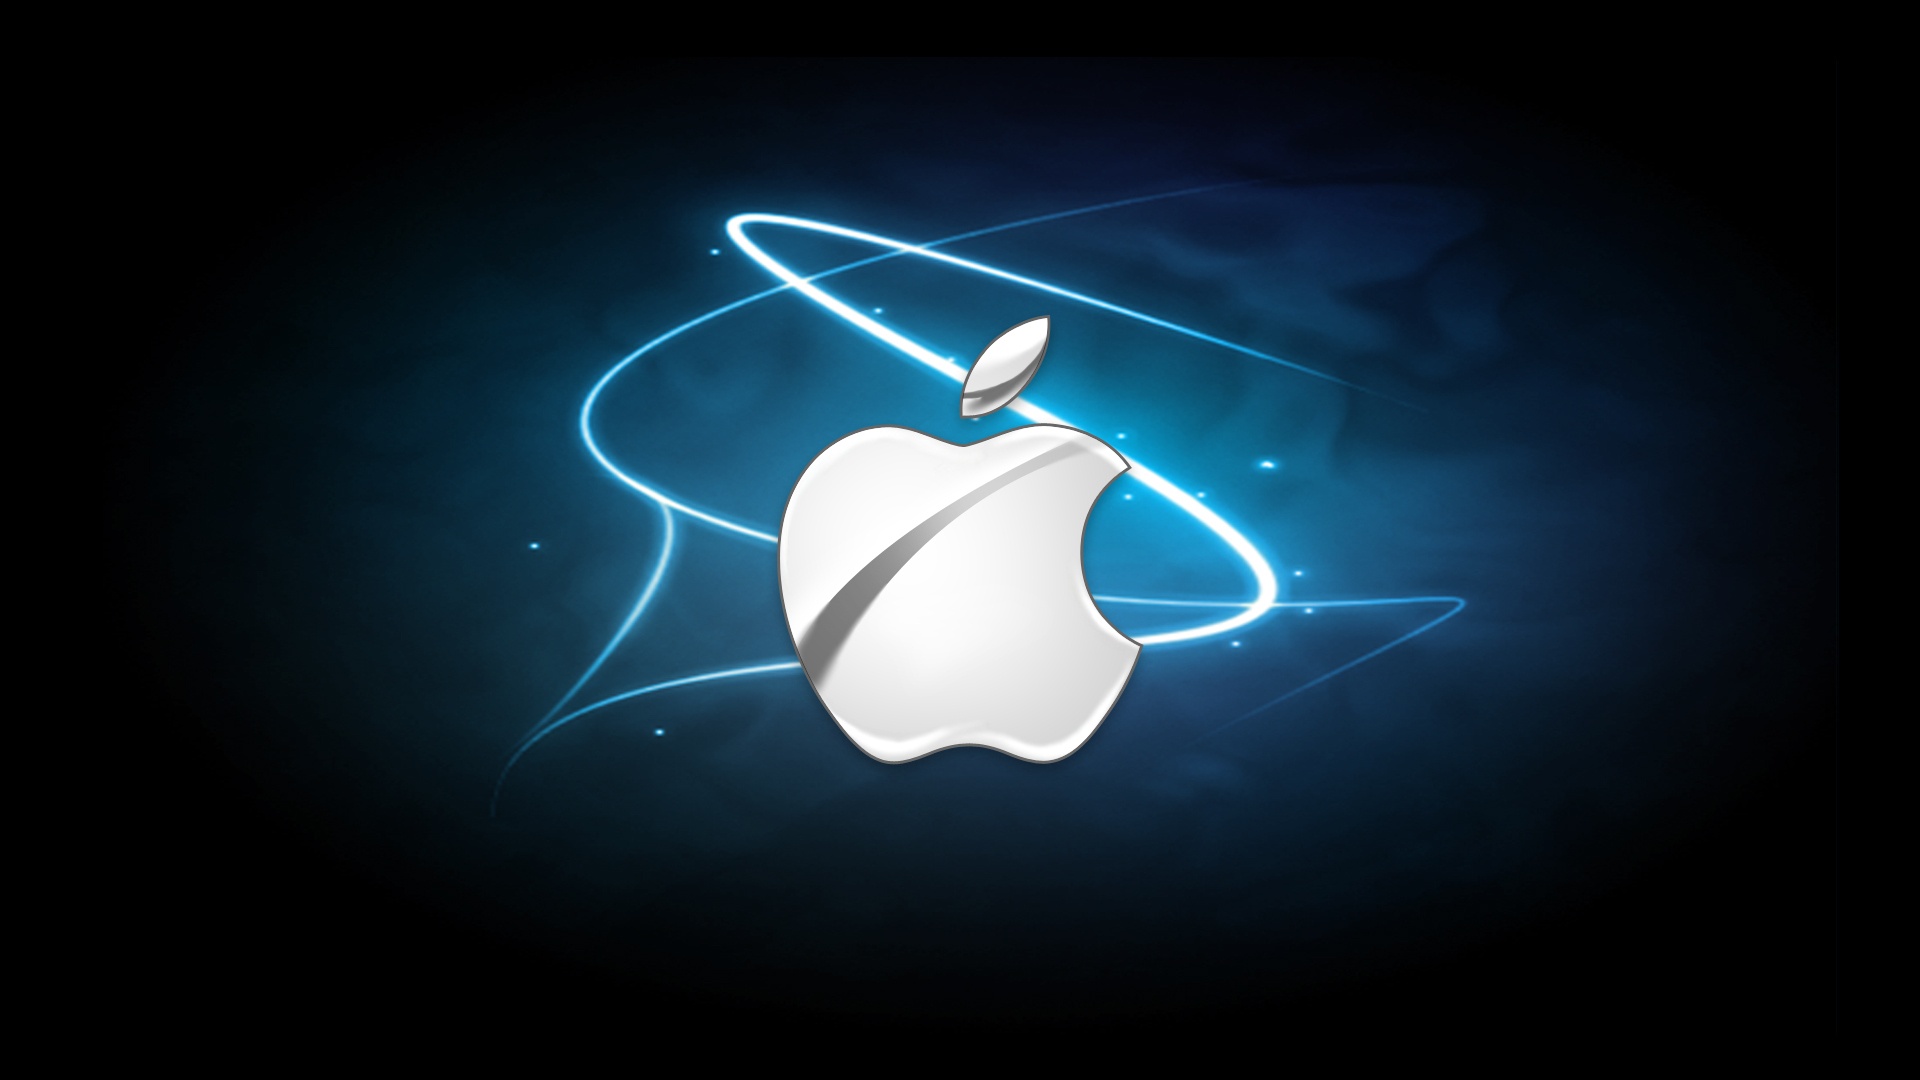 HD Apple Logo Wallpaper Share This Awesome Background On